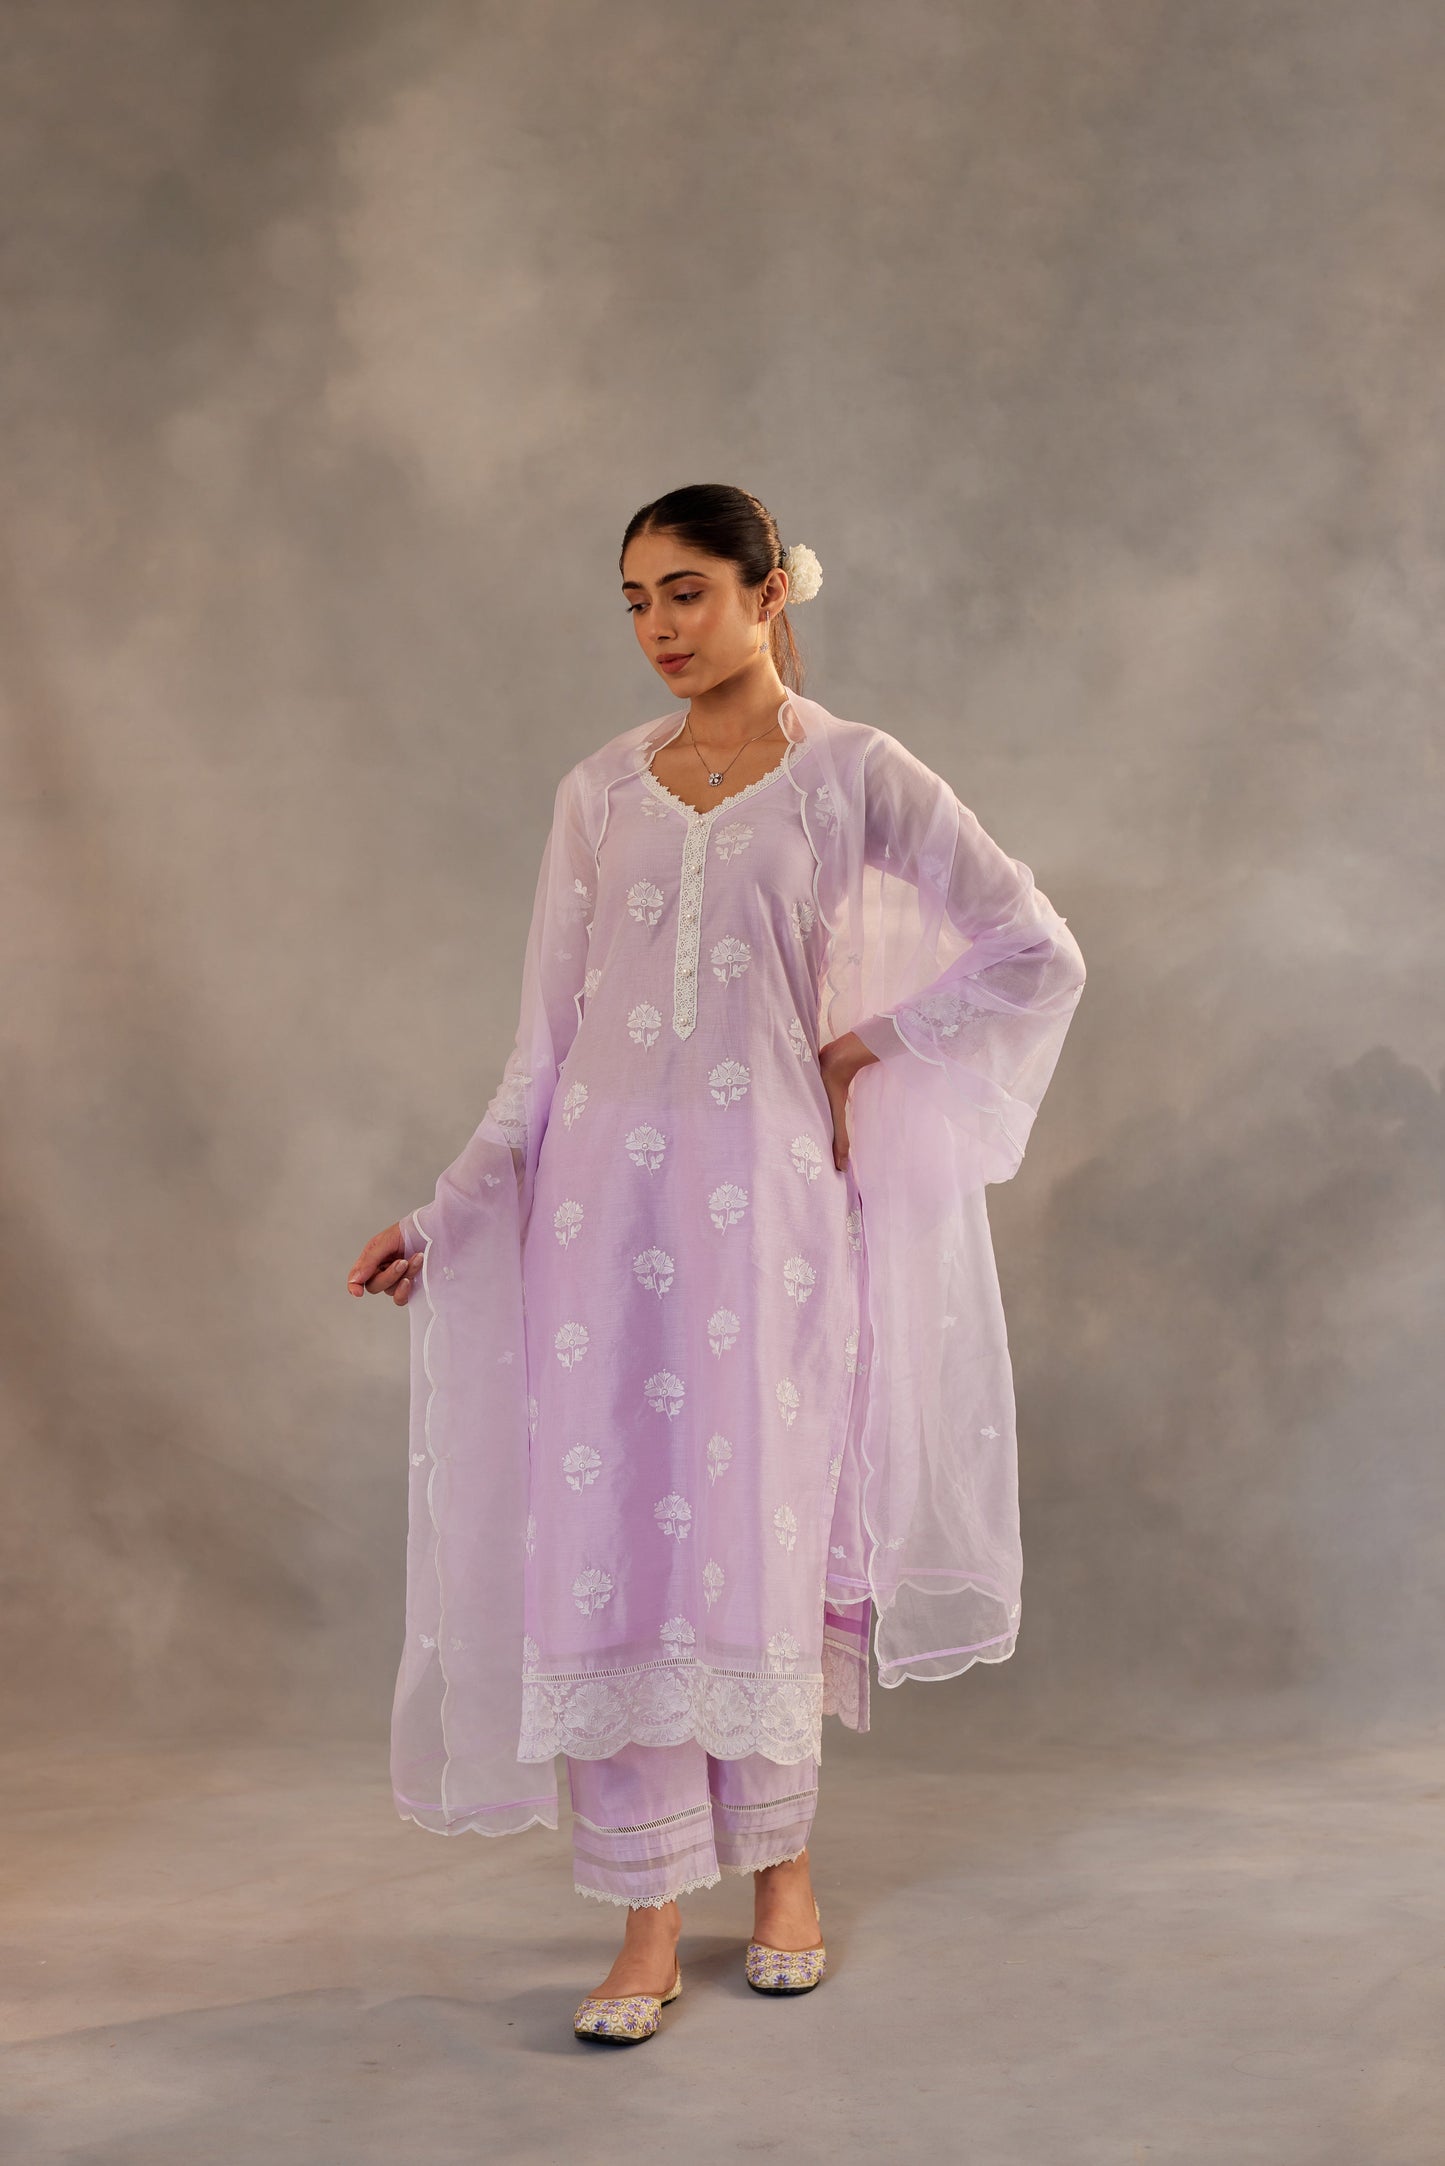 Mehreen Pirzada in Gul - Lavender Embroidered Suit Set.